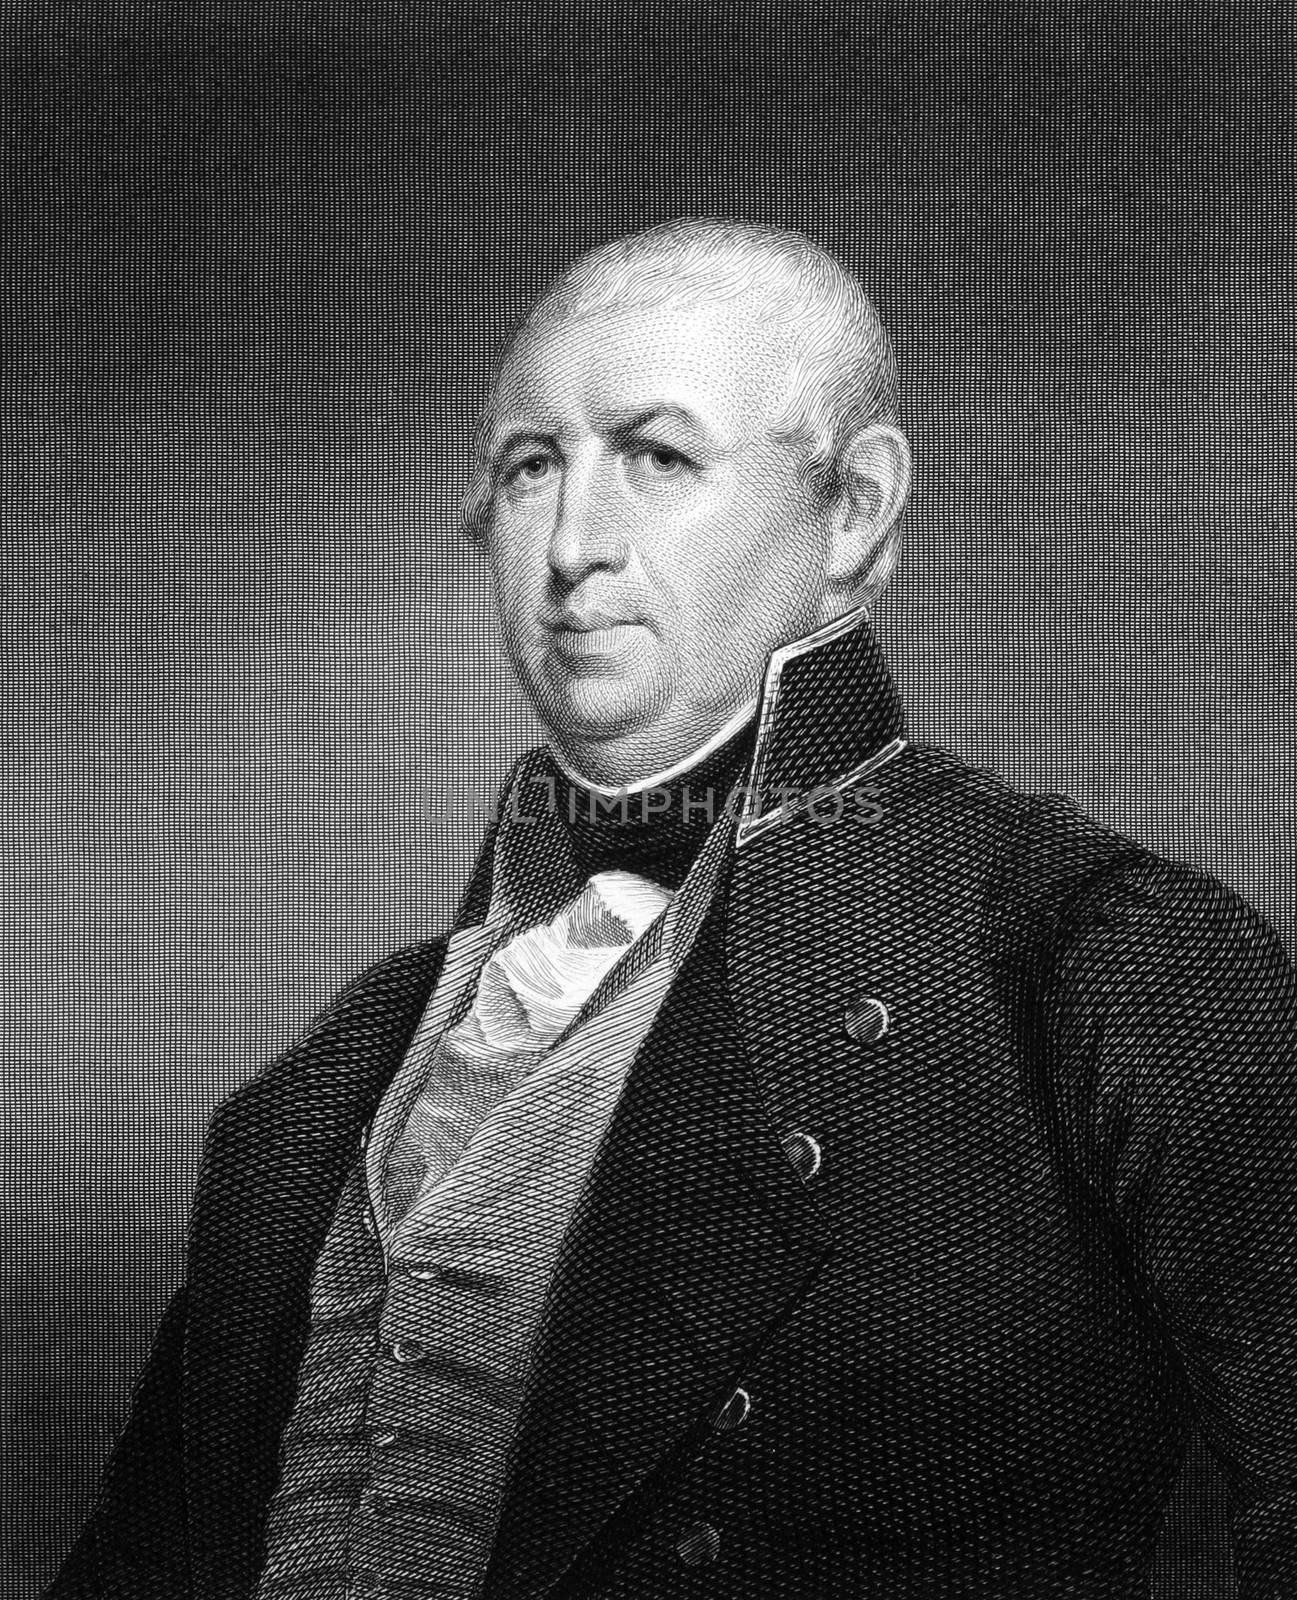 Isaac Shelby (1750-1826) on engraving from 1834. 1st and 5th Governor of the U.S. state of Kentucky and a soldier in the Revolutionary War. Engraved by A.B Durand and published in ''National Portrait Gallery of Distinguished Americans'',USA,1834